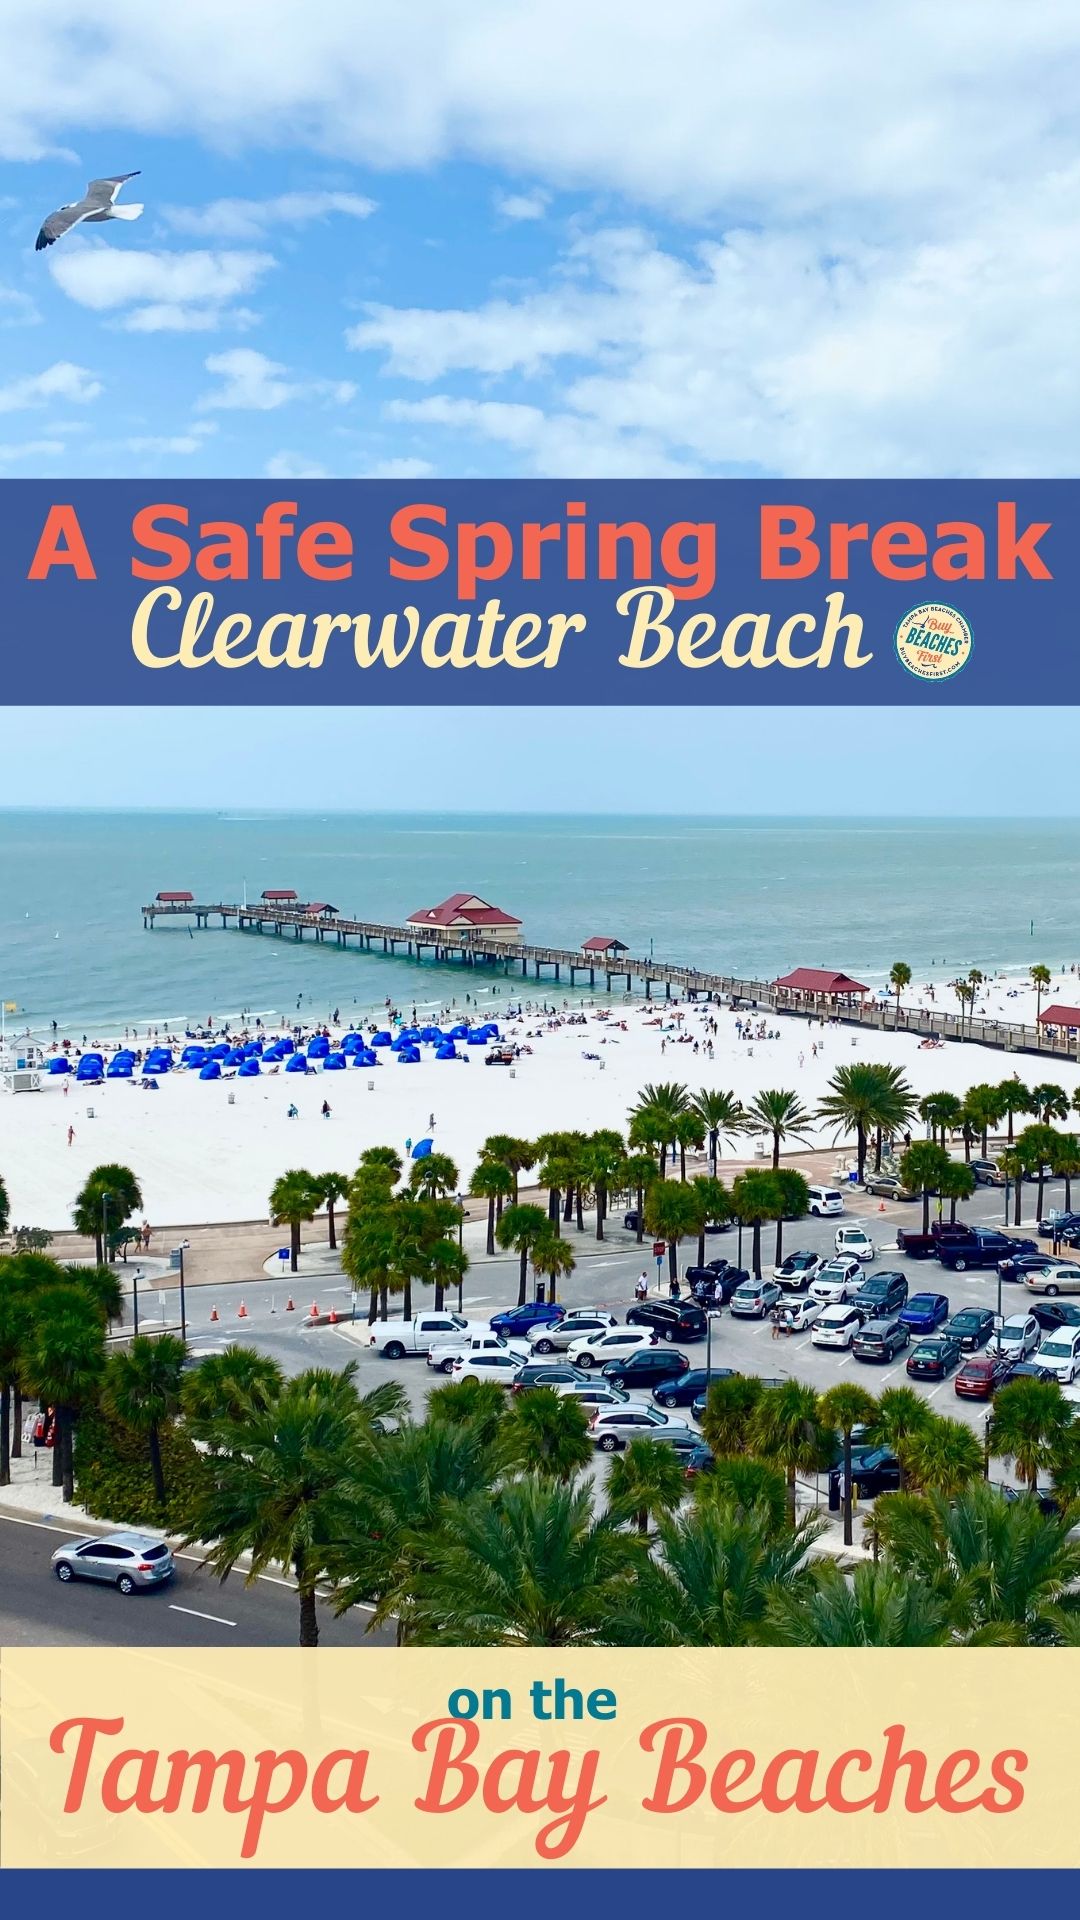 Image for A Safe Spring Break in Clearwater, Florida